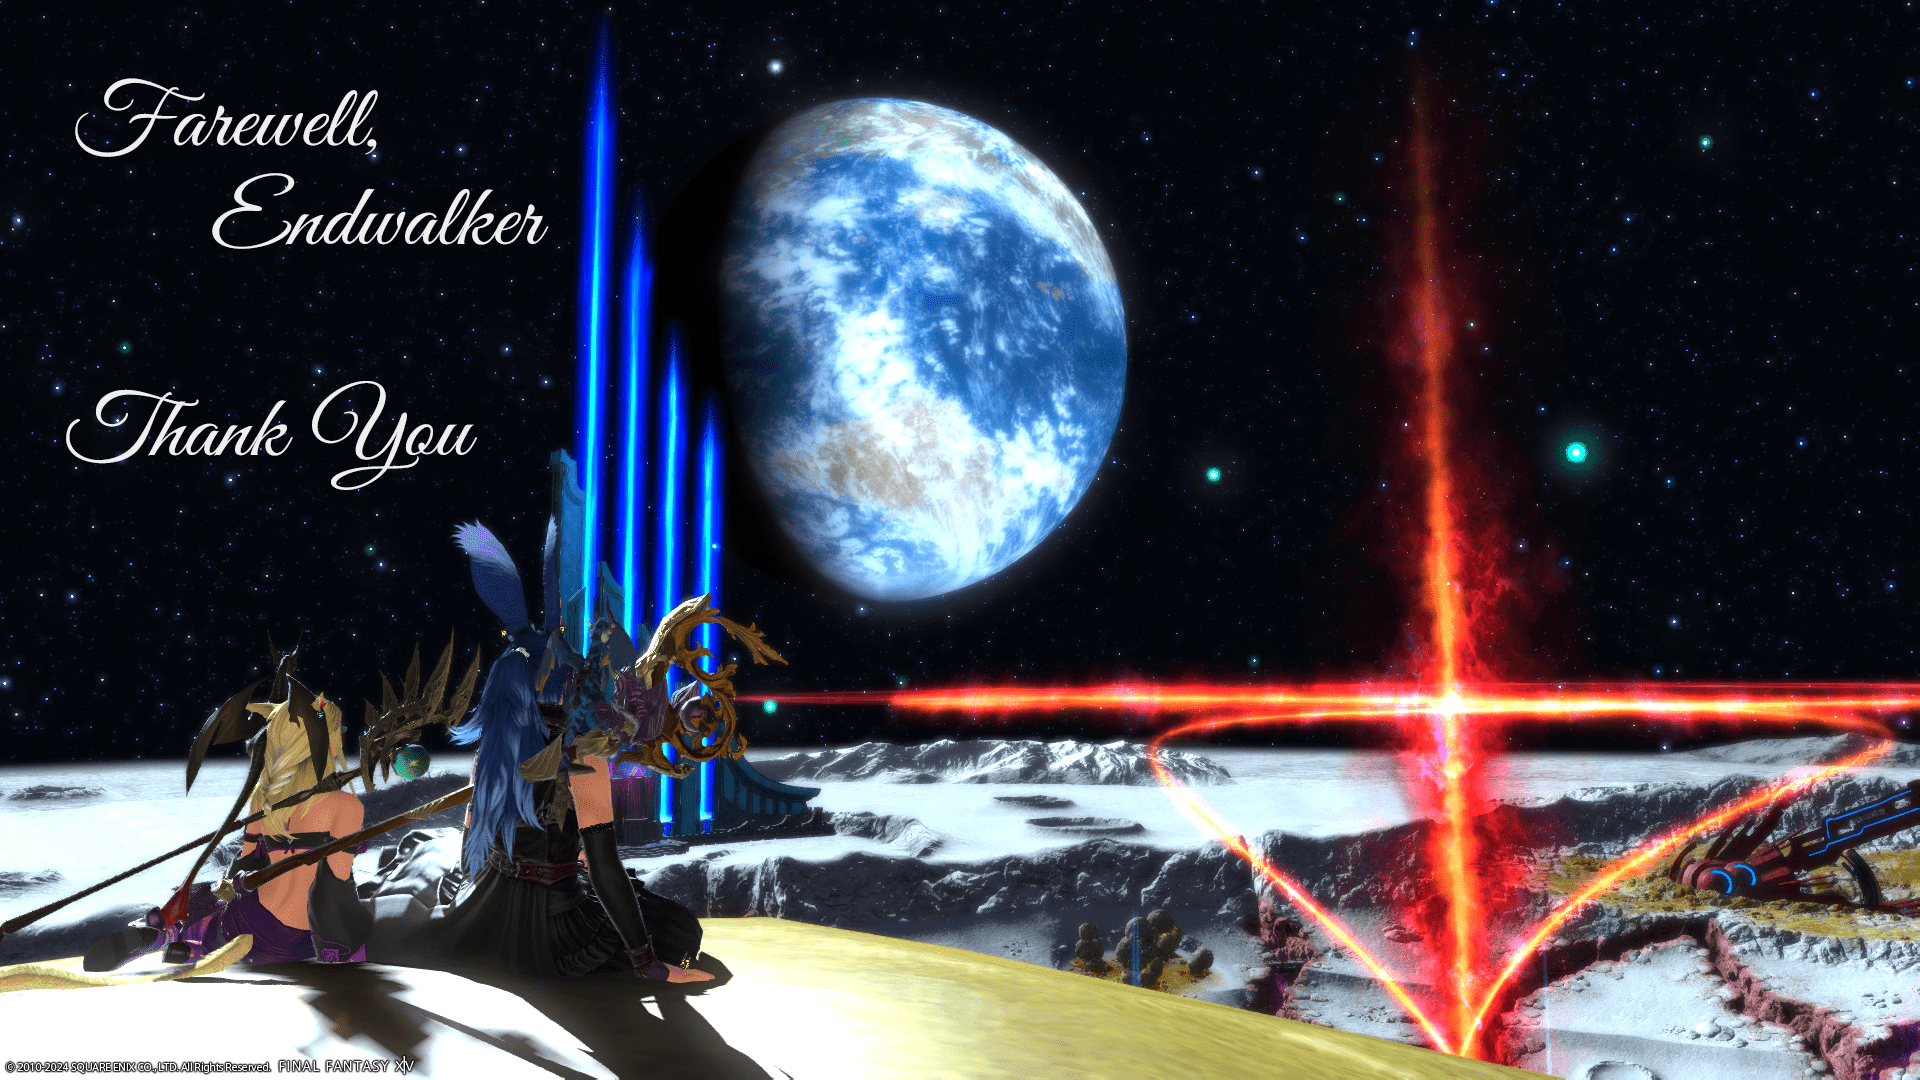 Aikirees and I on the Moon looking out at Eheirys with the message 'Farewell, Endwalker. Thank you.'